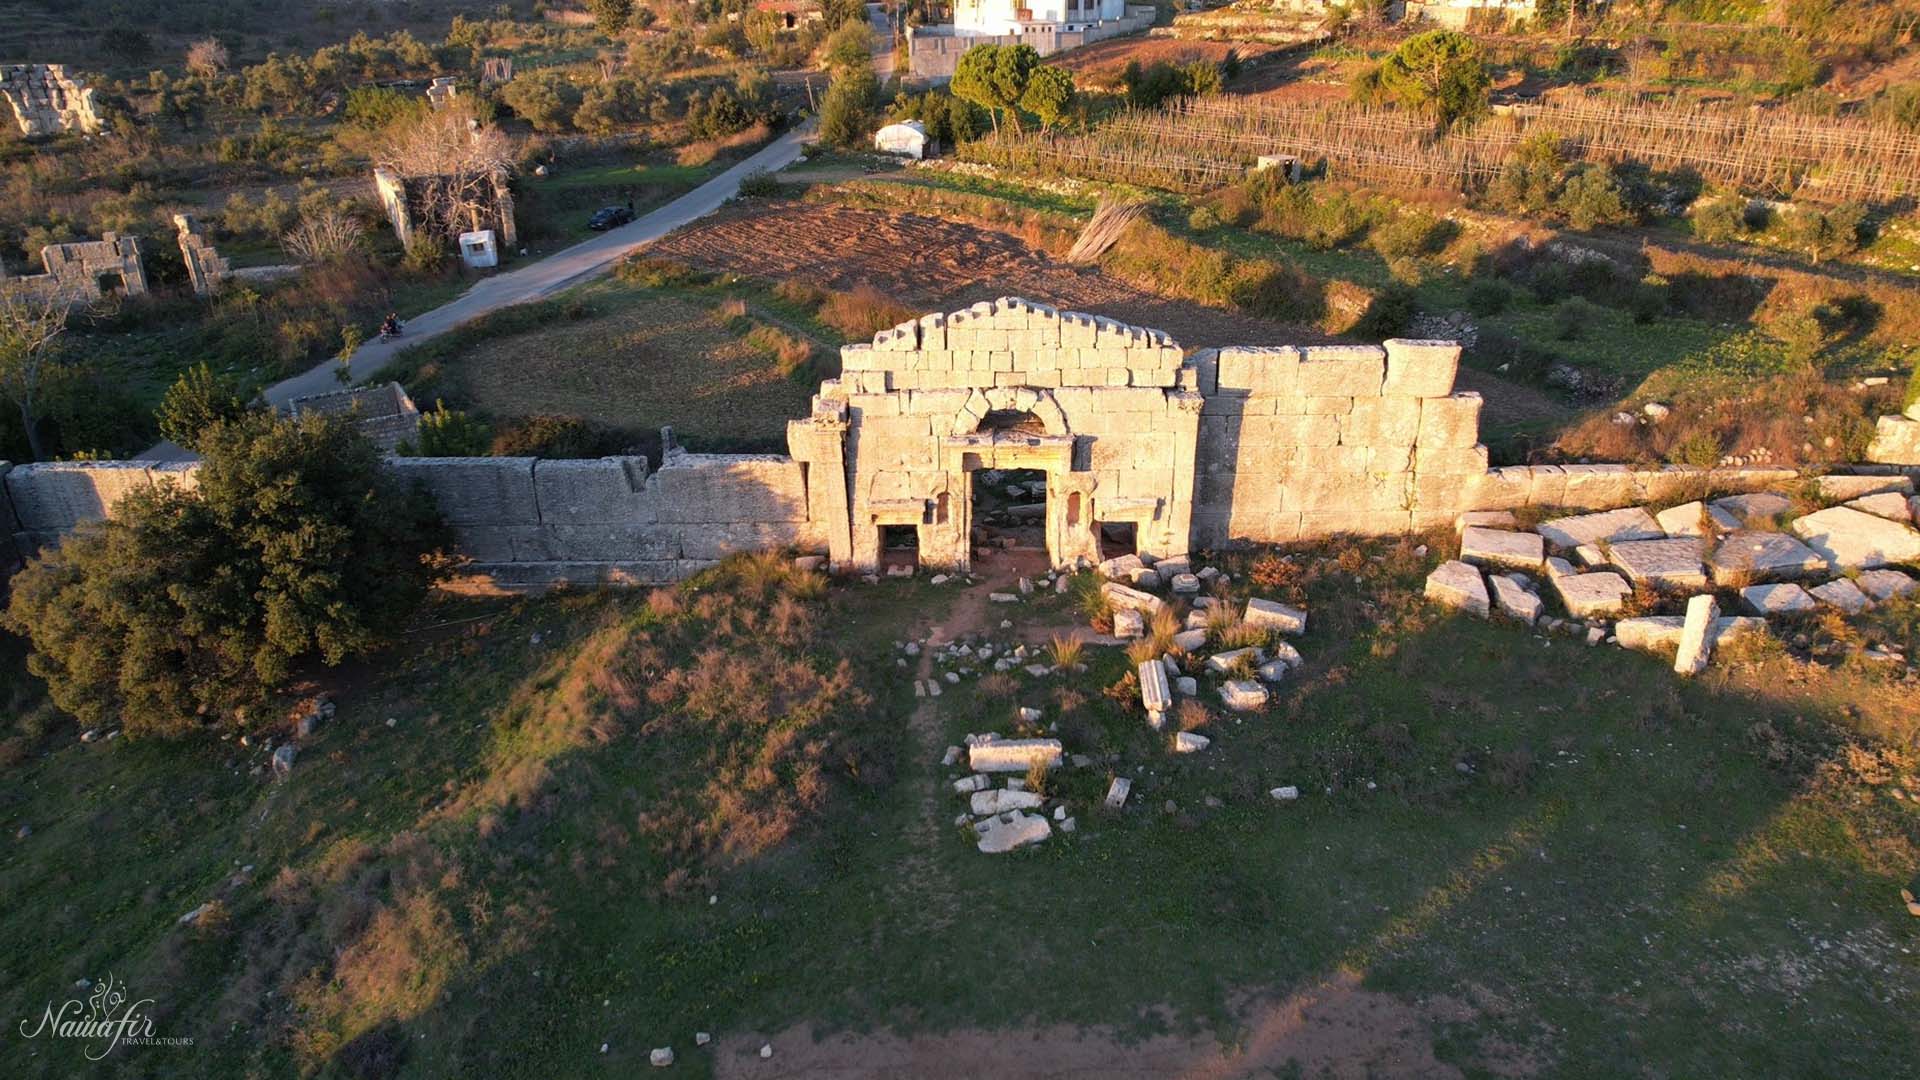 From an aerial viewpoint, a photograph captures the entrance of Hosn Suleiman, embraced by lush trees and scattered ruins on the ground, creating a captivating composition.